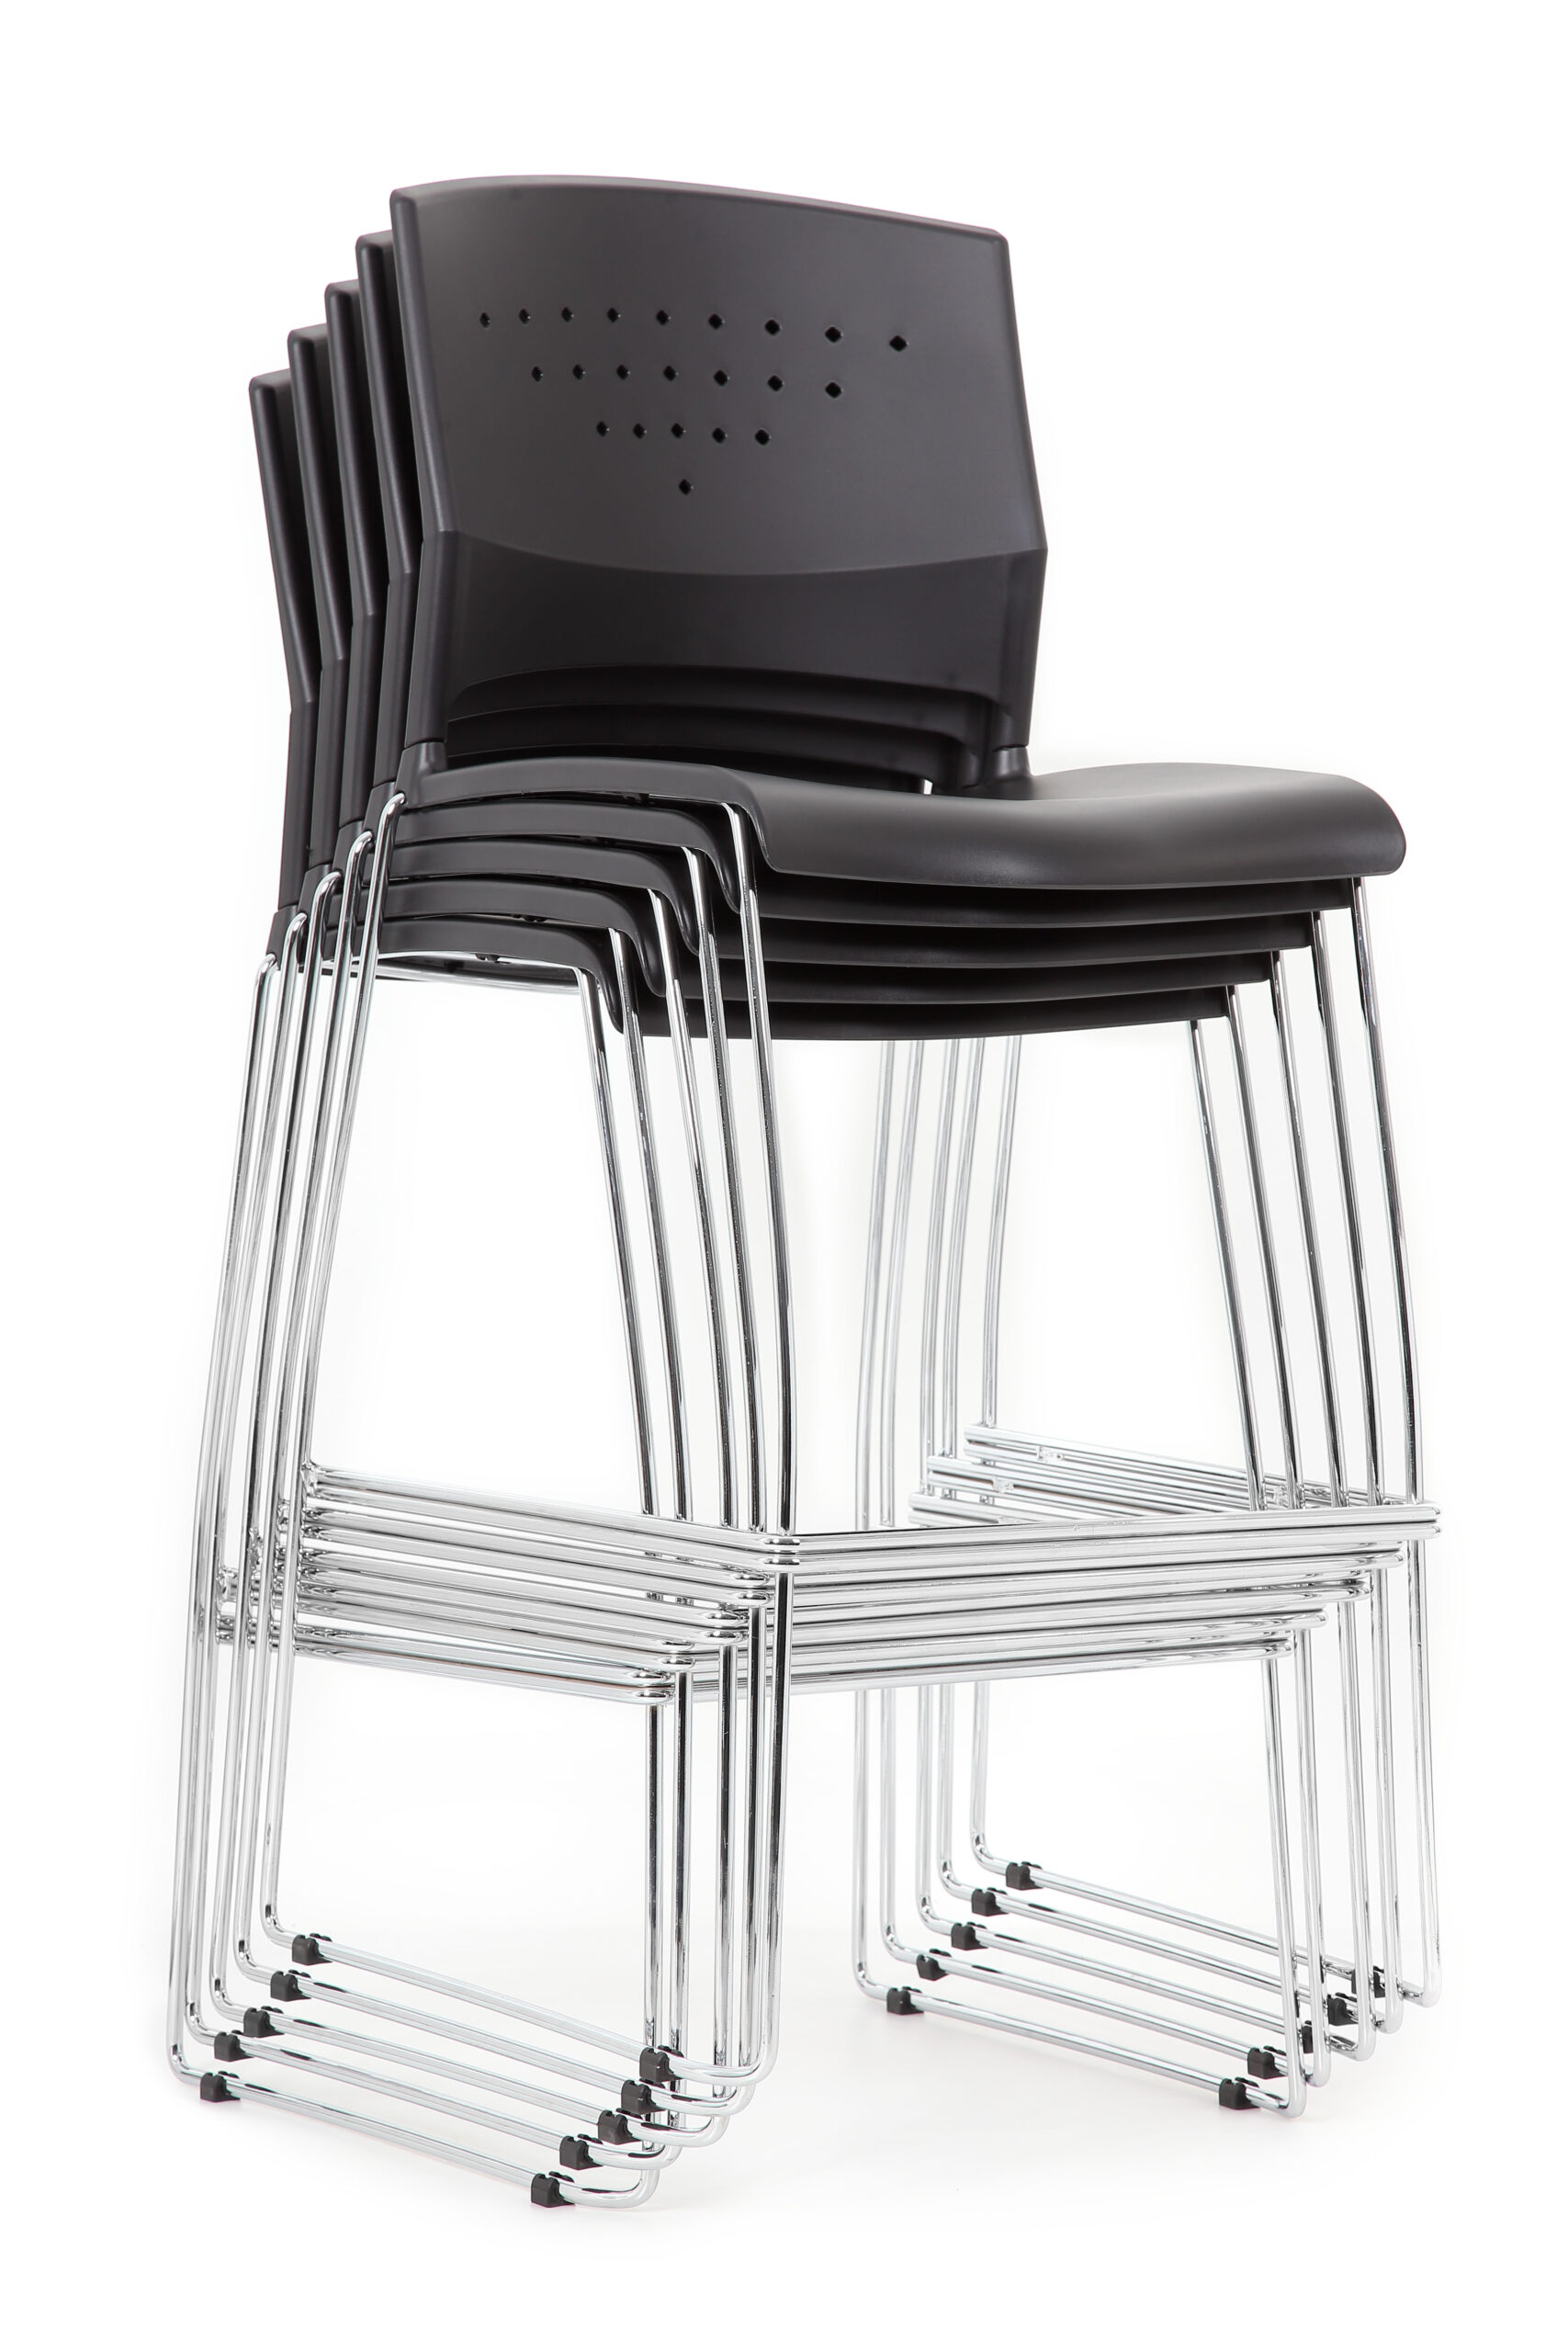 With Stool of BossChair Chrome Black – (set Stack Boss 2) Frame